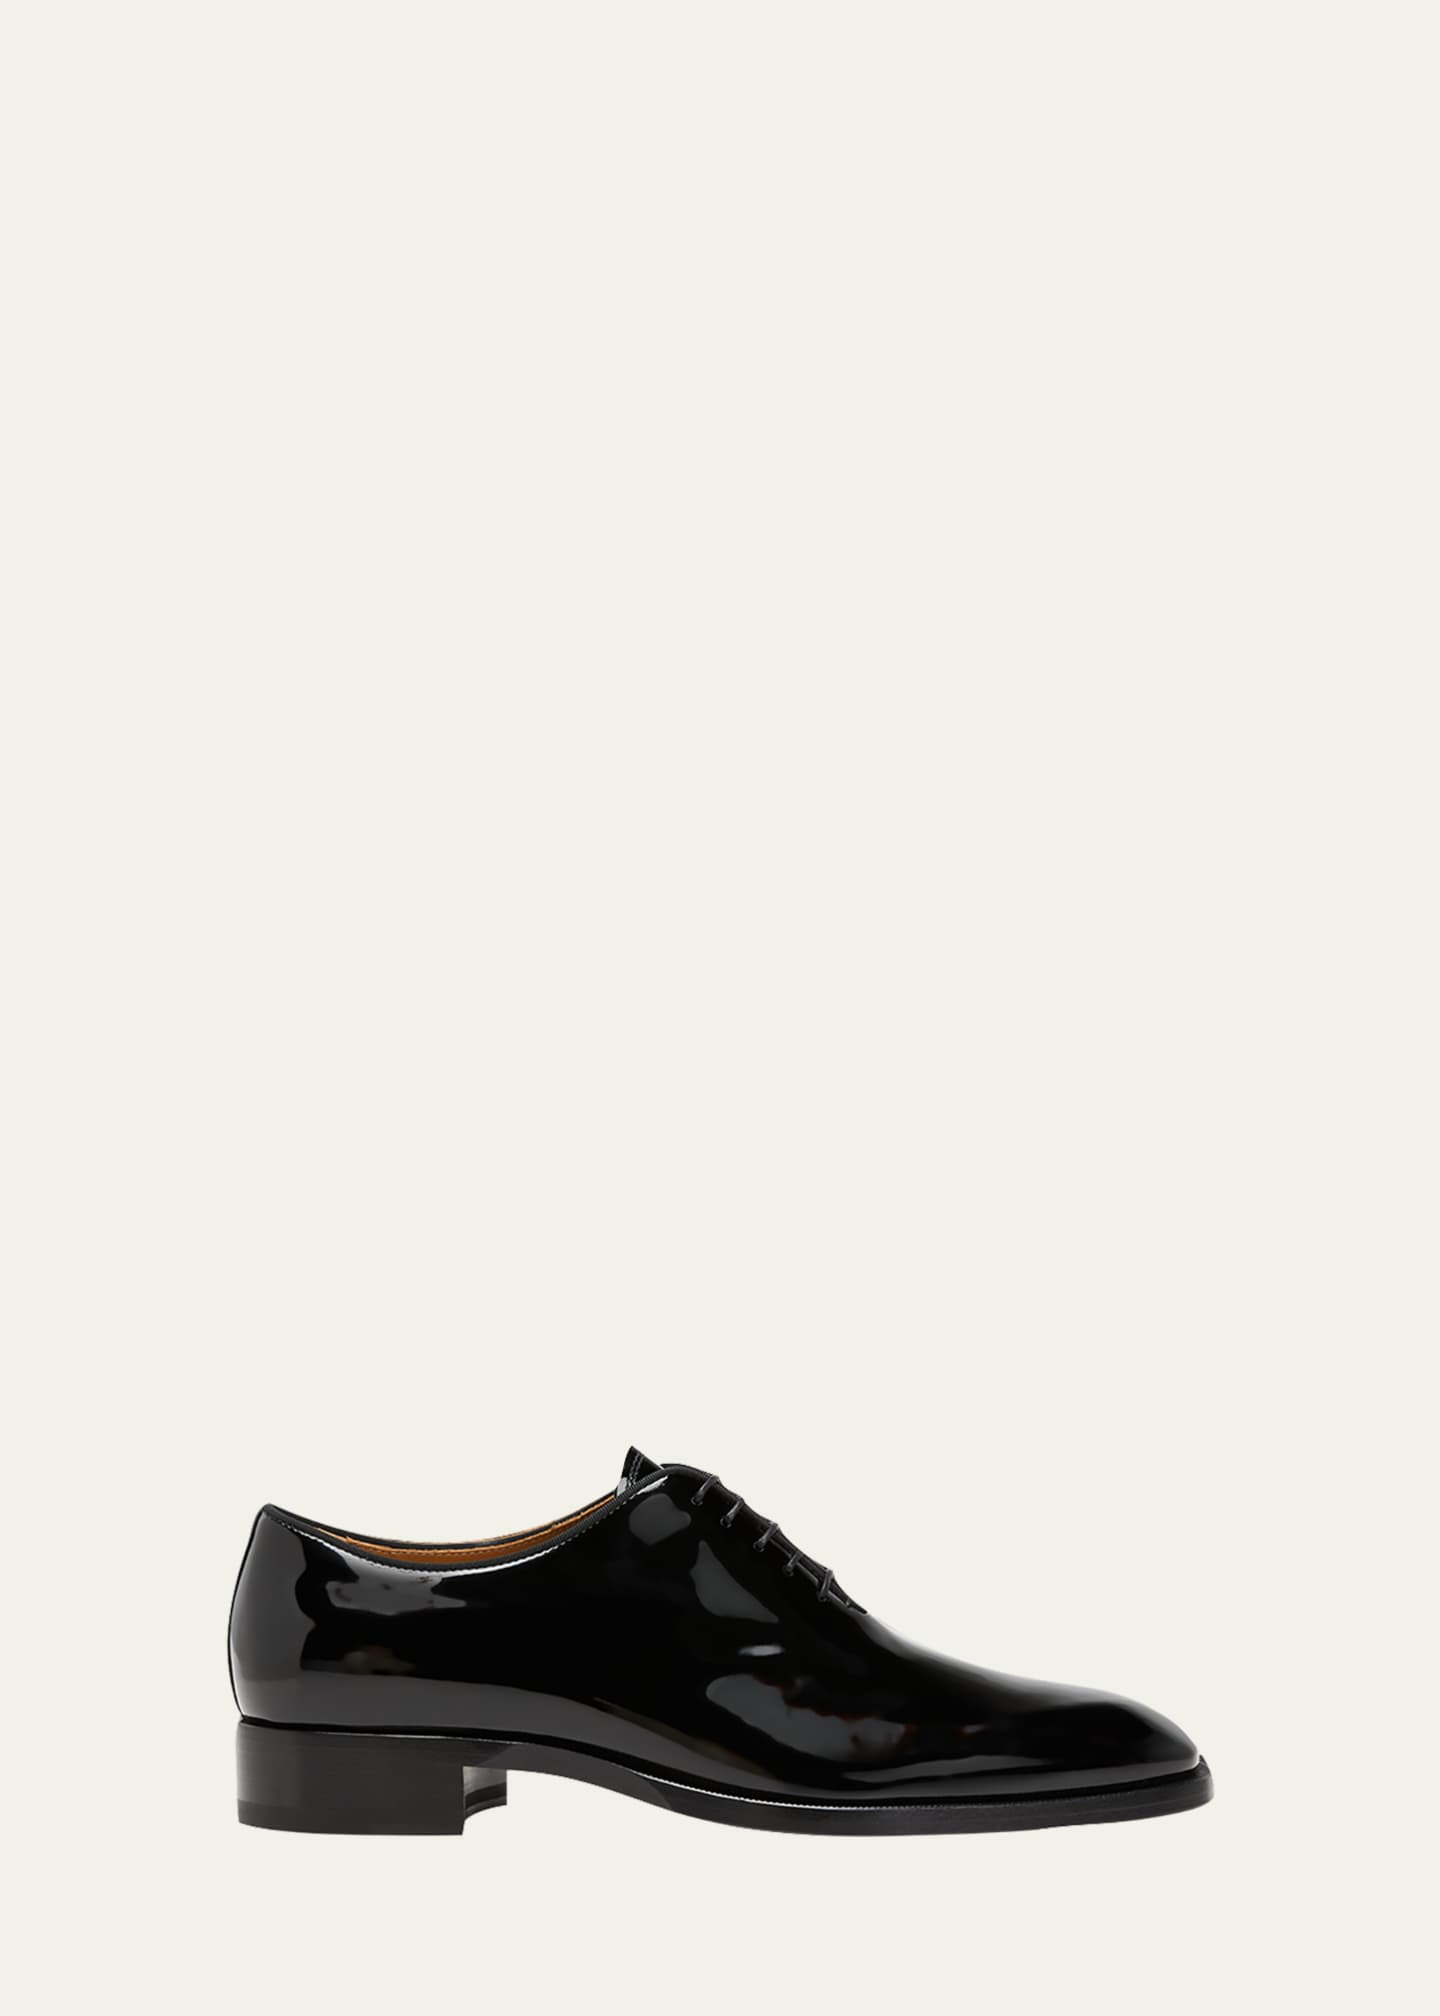 Christian Louboutin Men's Corteo Patent Leather Oxford Shoes - Bergdorf ...